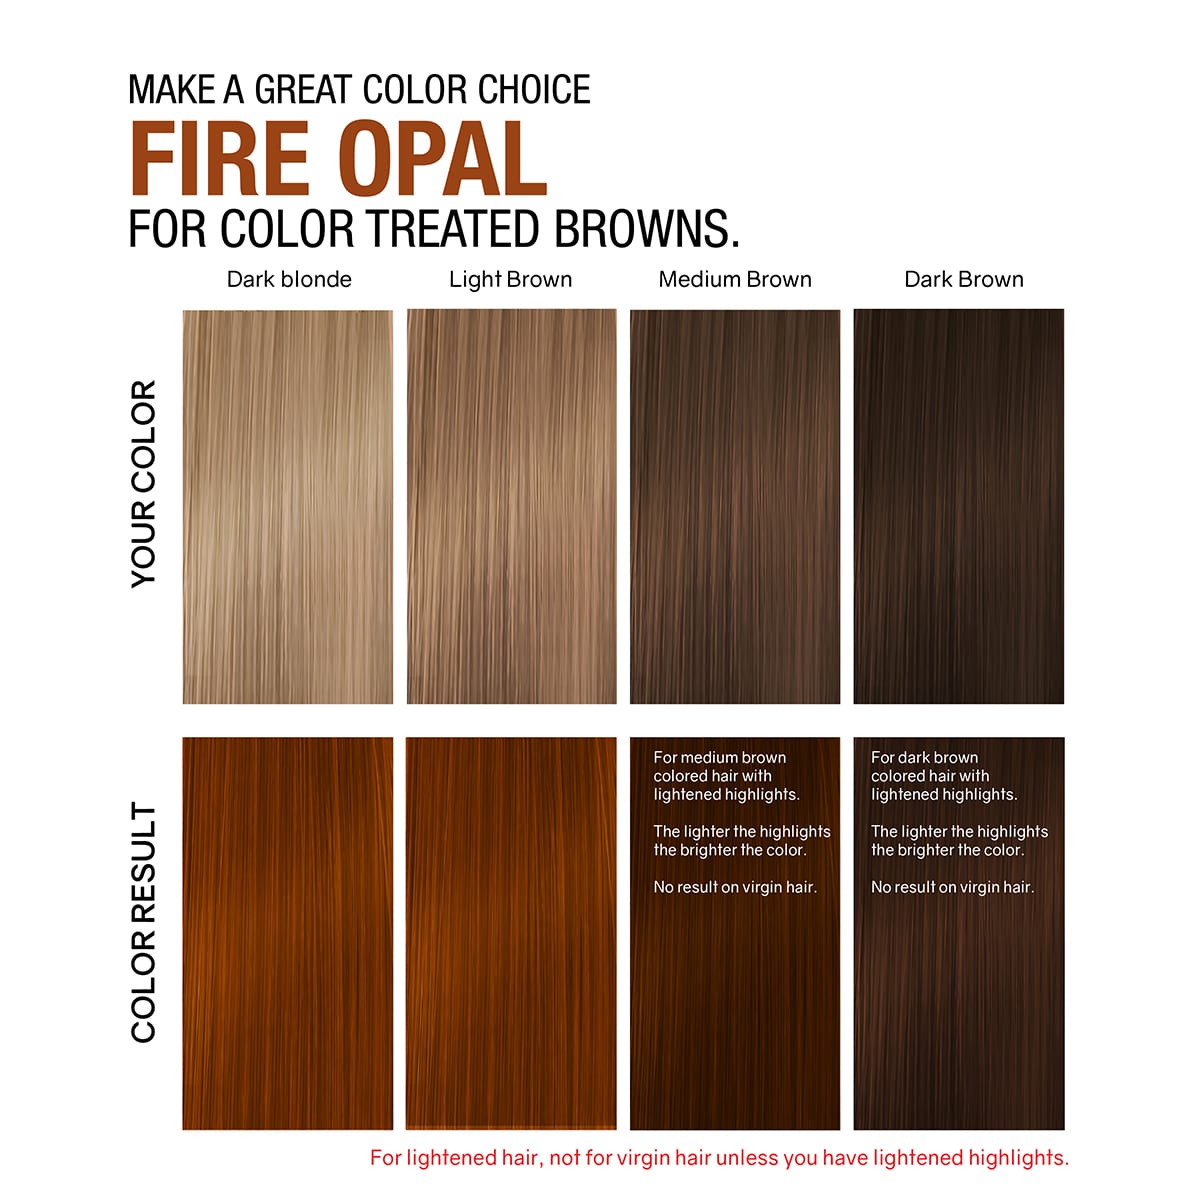 Celeb Luxury Fire Opal Colorditioner - 8.25 oz (Buy 3 Get 1 Free Mix & Match)